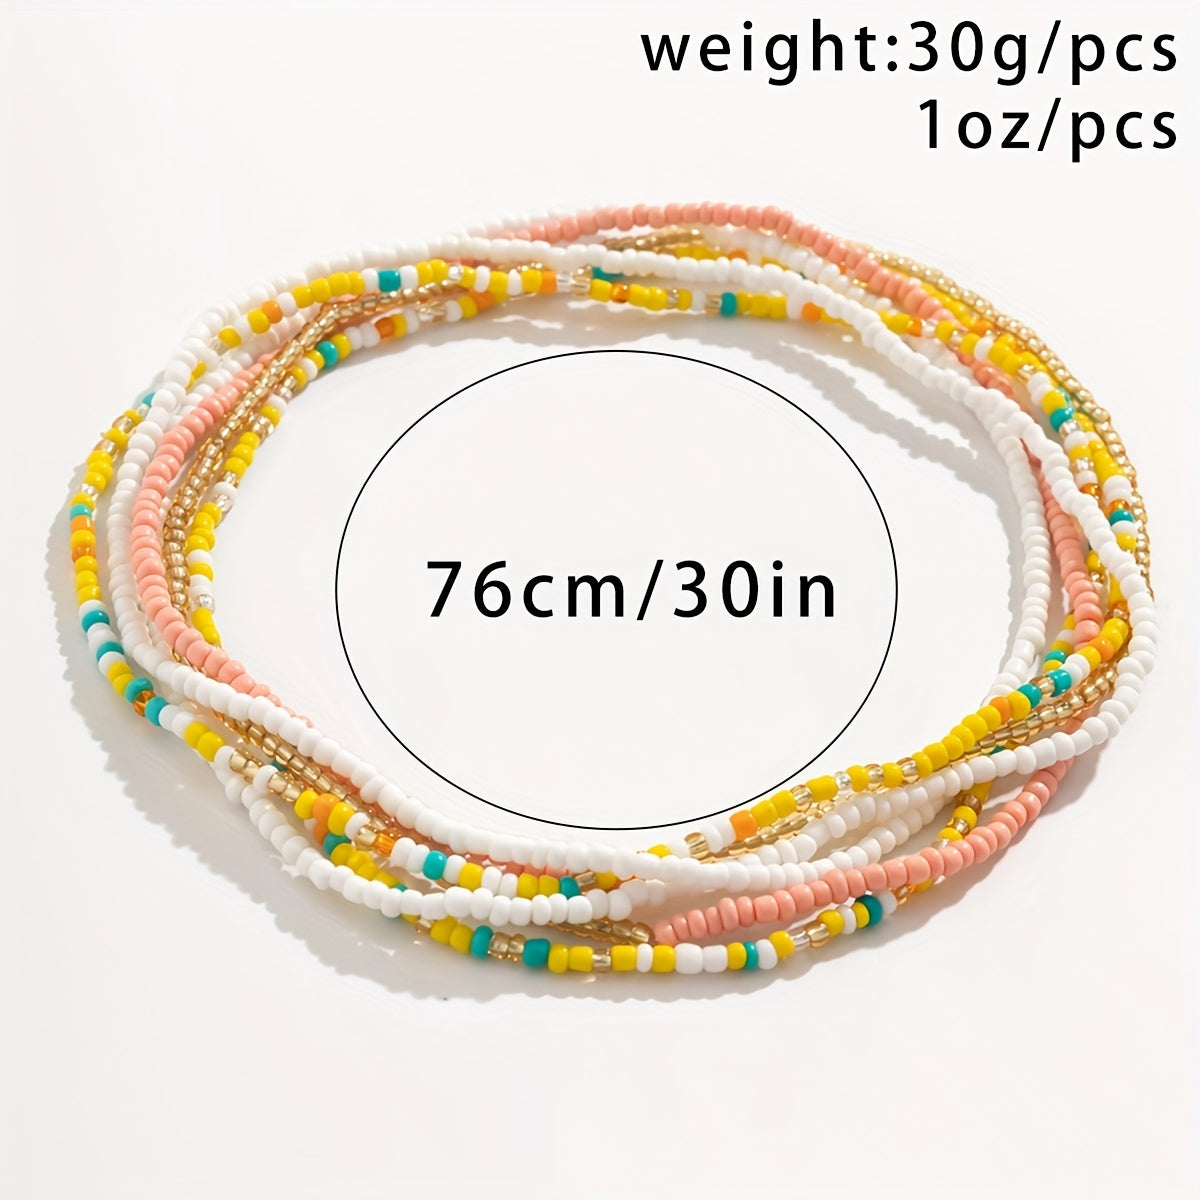 3pcs Beaded Waist Chain With Colorful Mini Rice Beads Boho Style Body Chain Jewelry Accessories